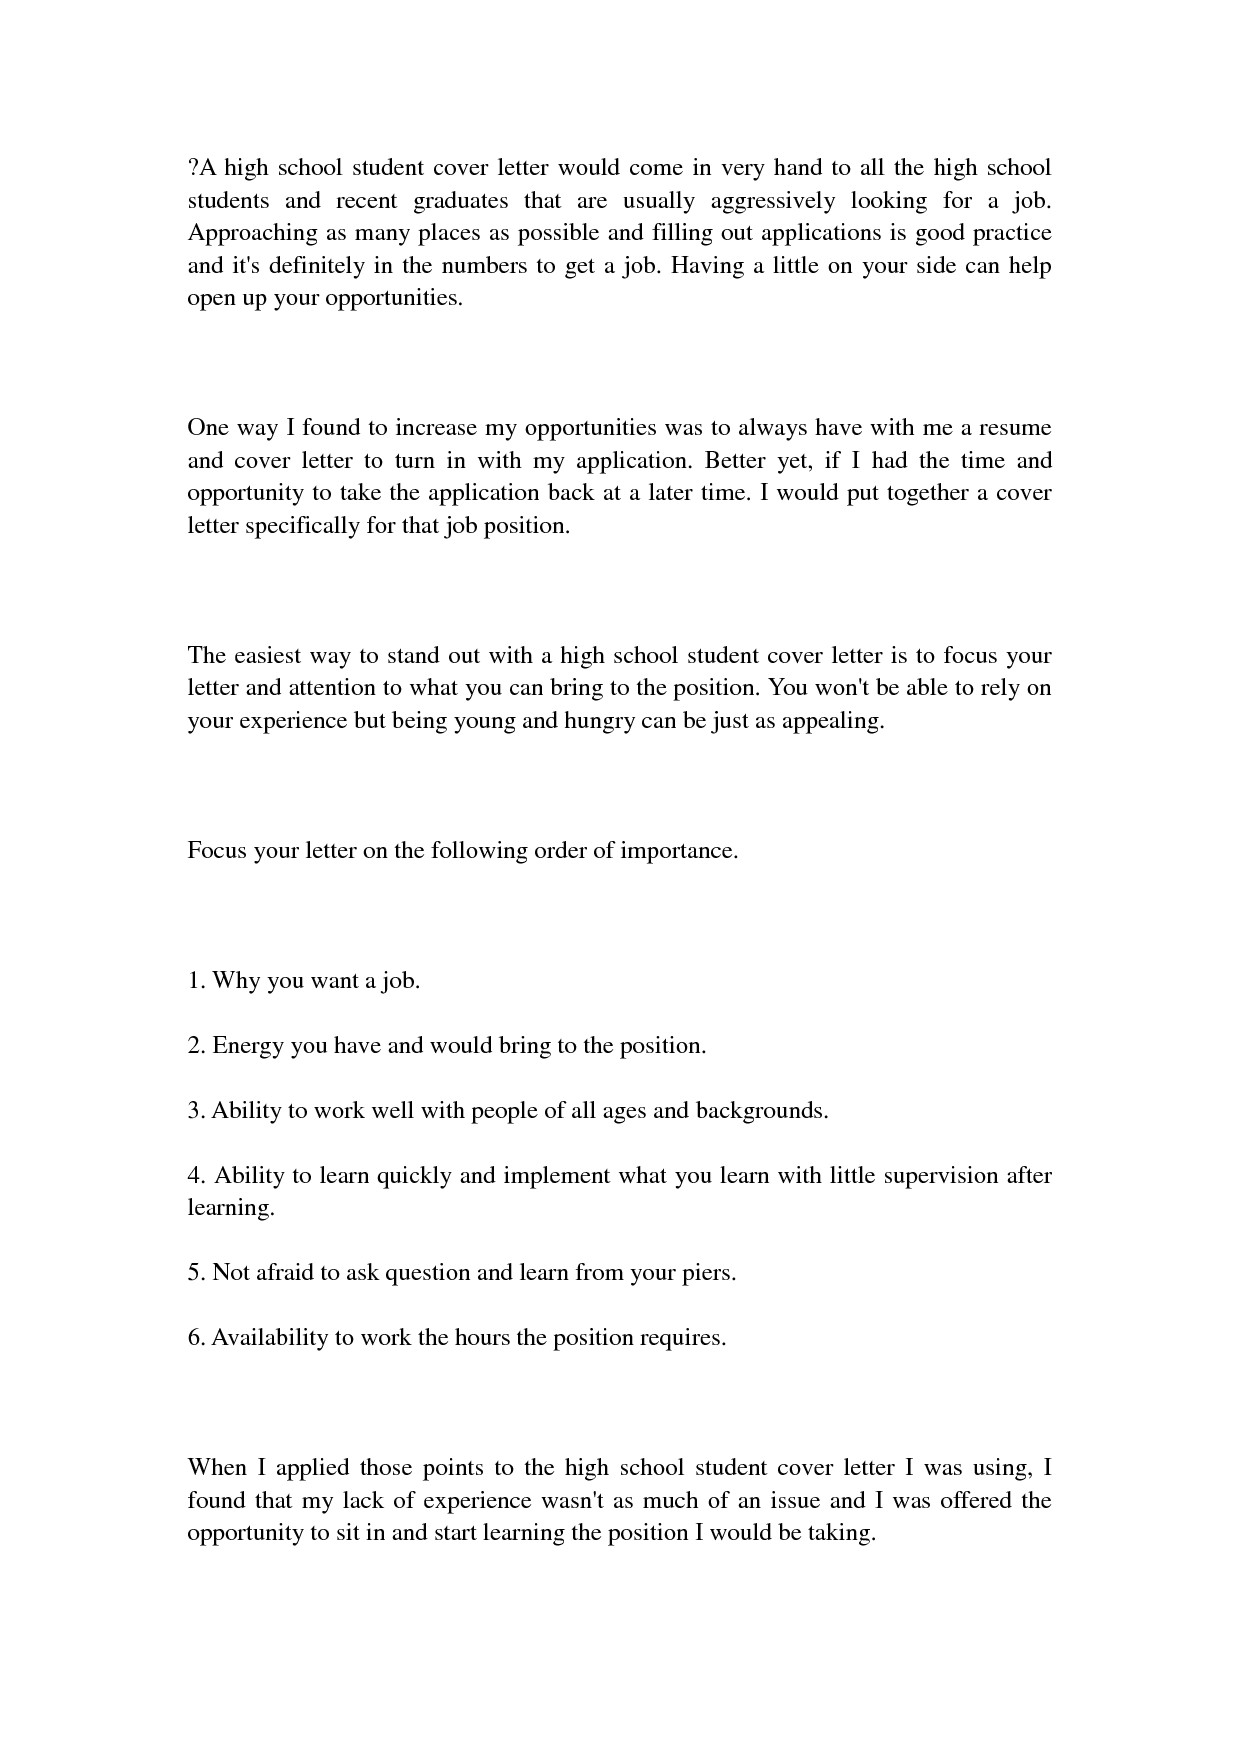 examples-of-cover-letters-for-high-school-students-sample-cover-letter